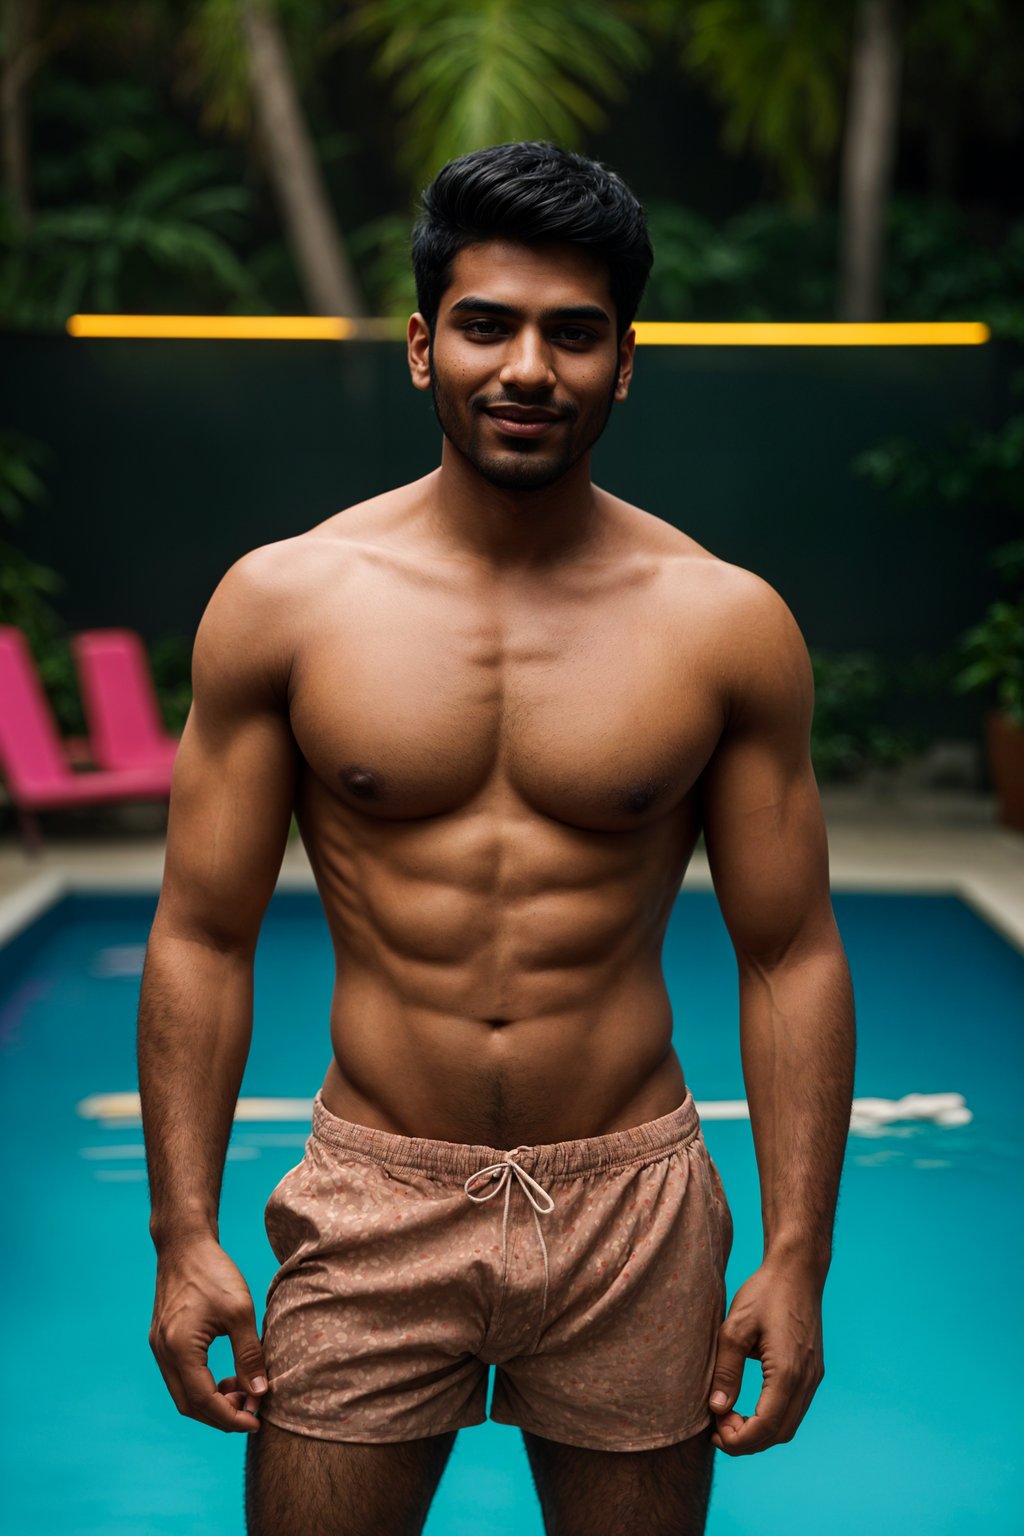 smiling man , fit body in floral silk  swim shorts and shirtless at pool party with neon lights